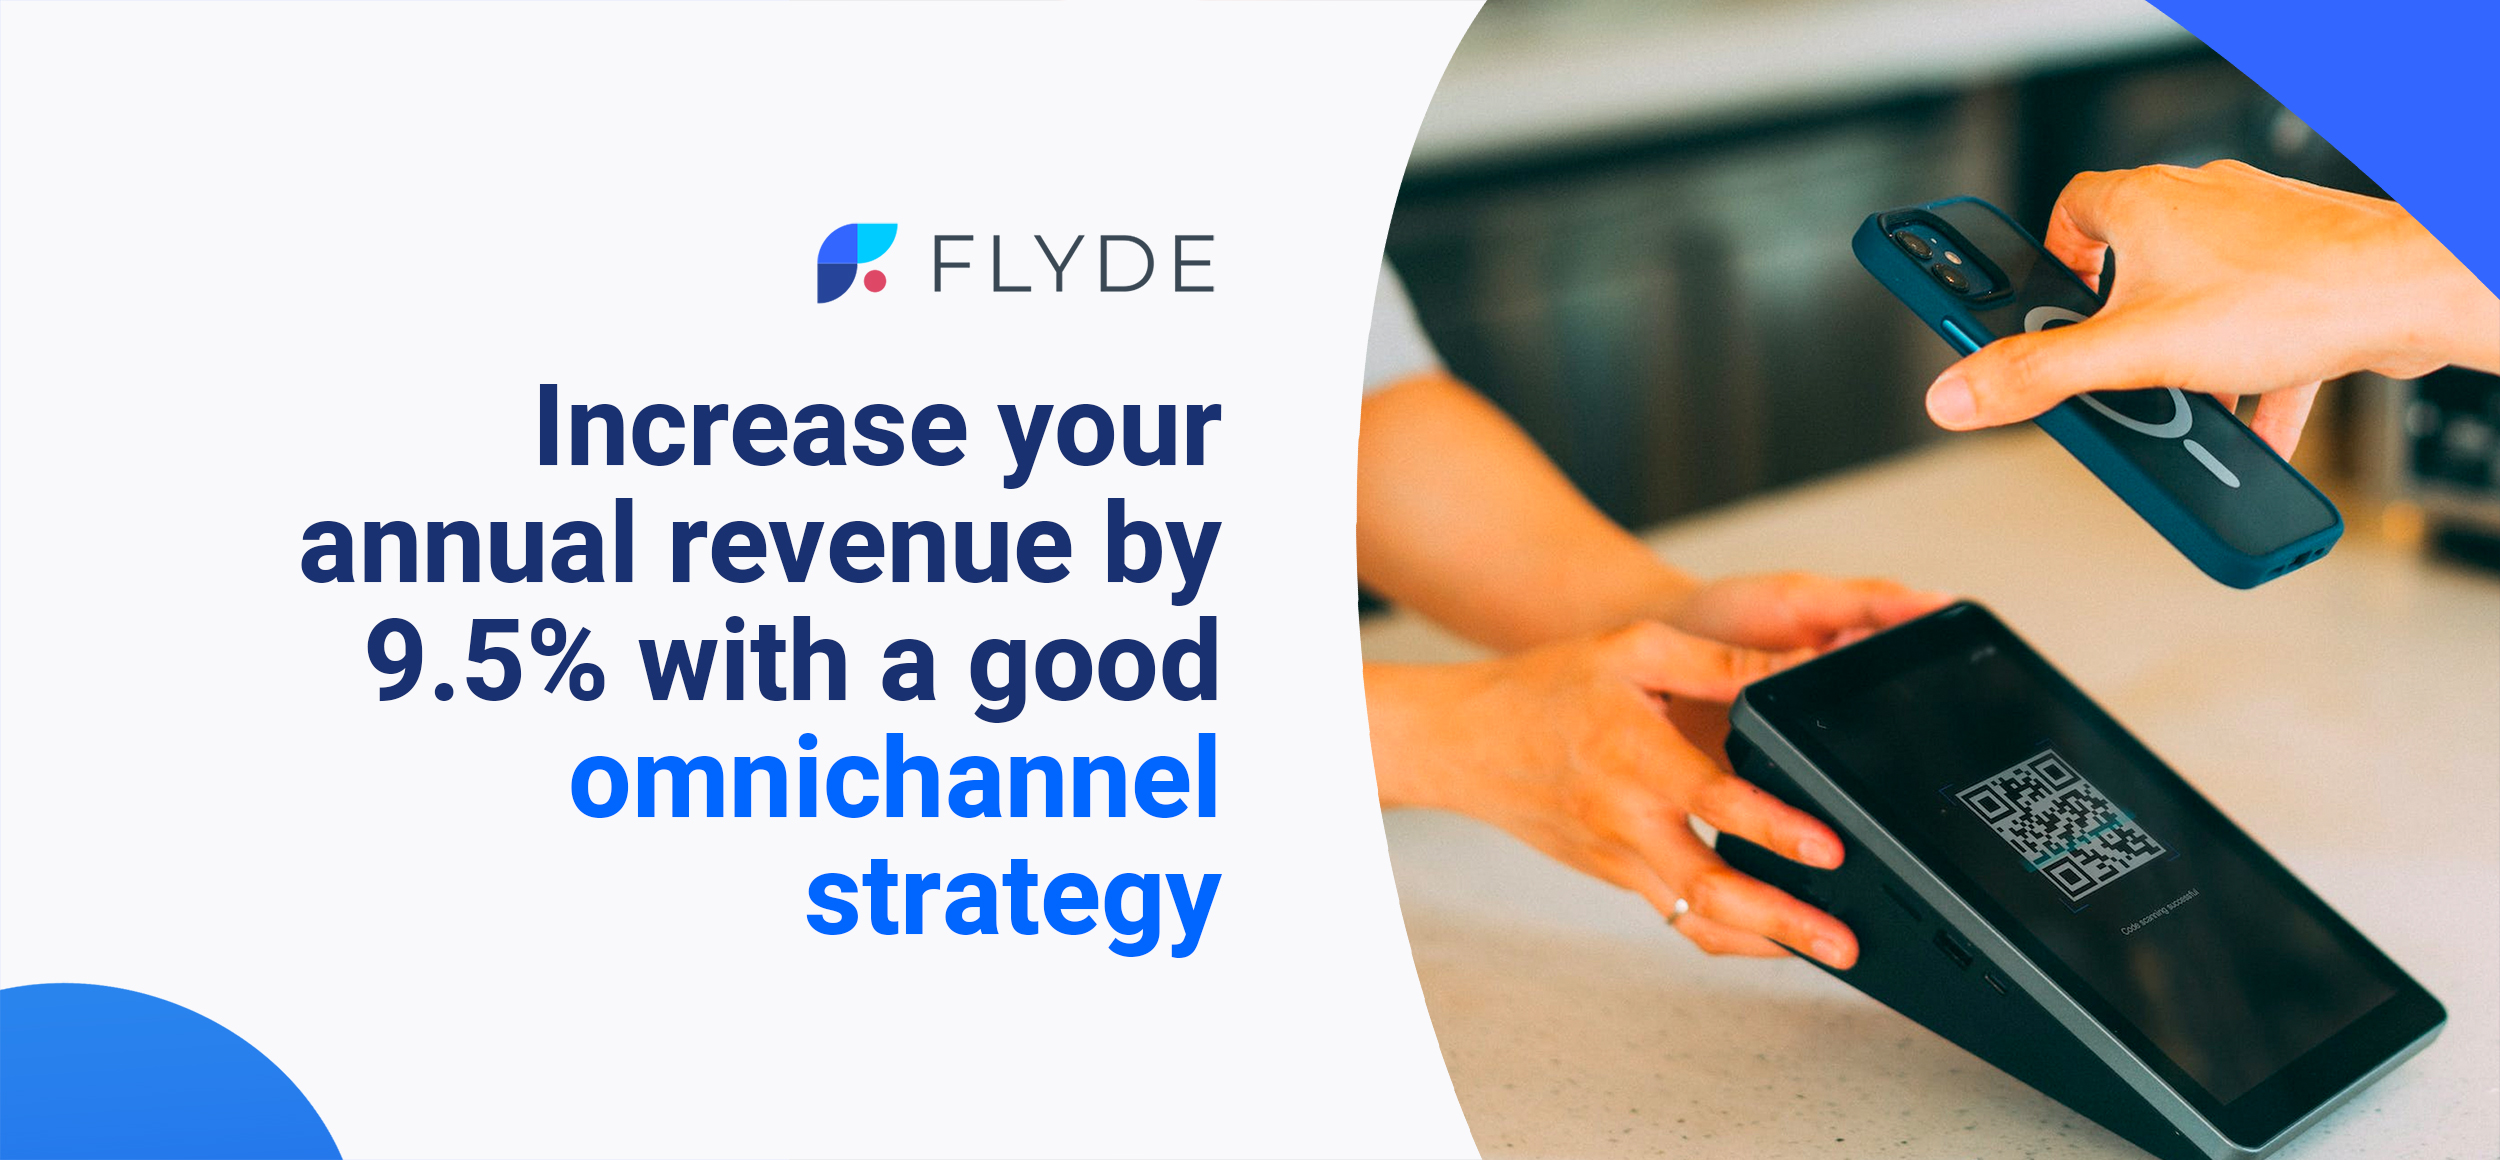 Increase your annual revenue by 9.5% with a good omnichannel strategy